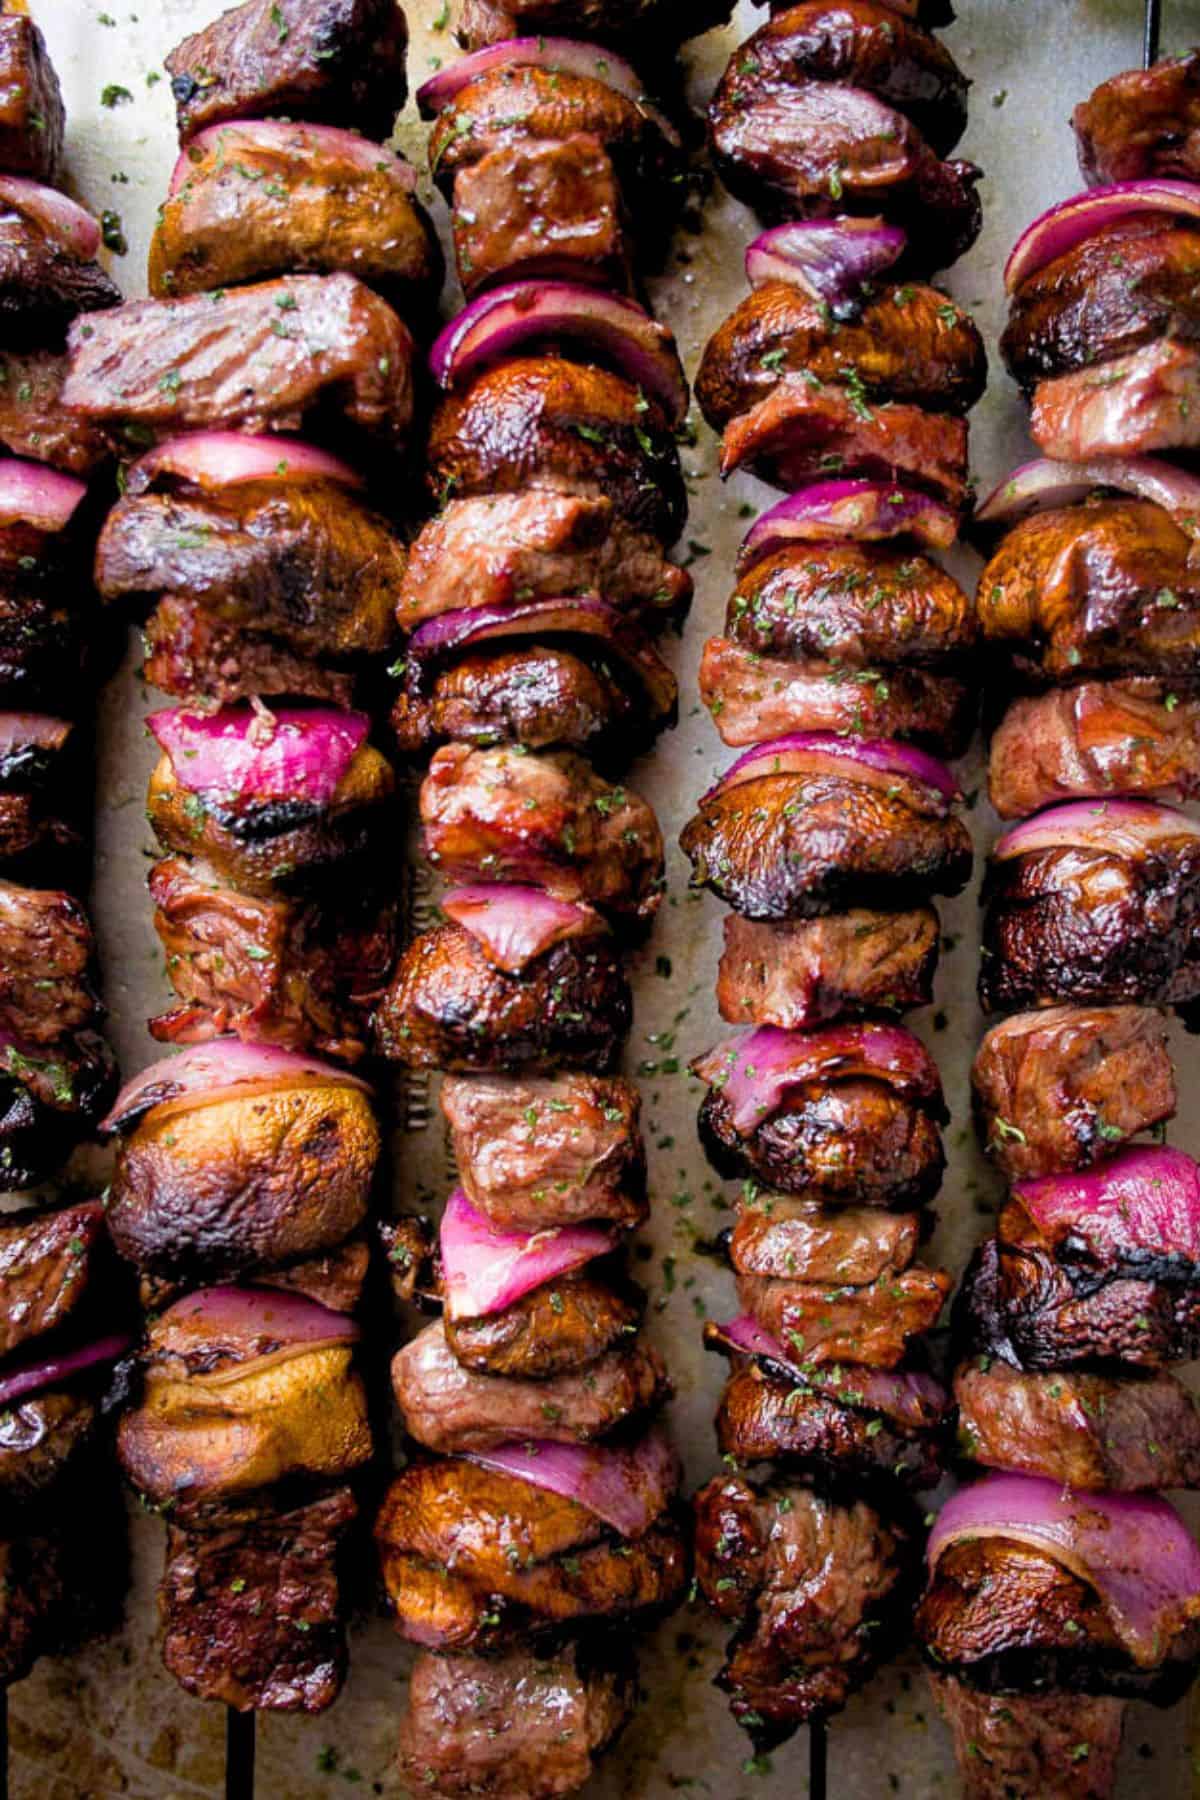 Close-up image of steak kabobs threaded onto skewers.